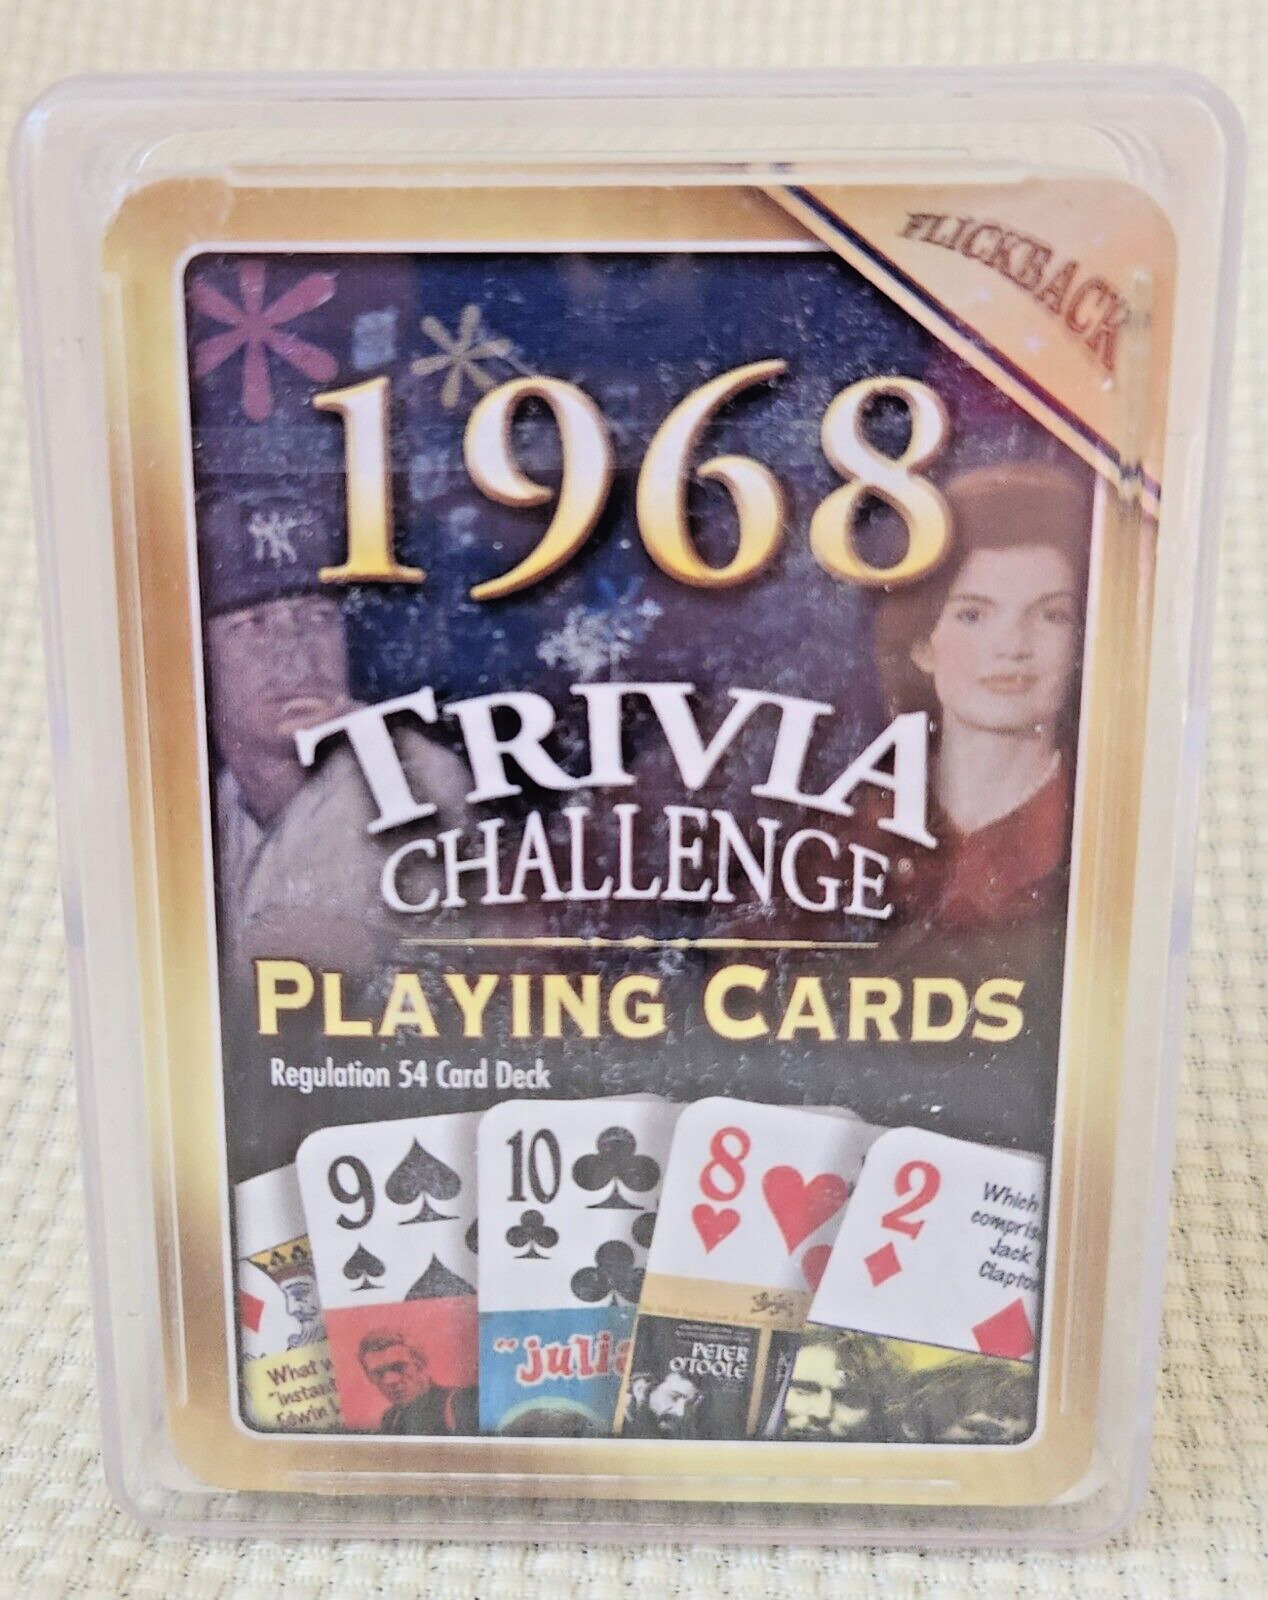 FLICKBACK 1968 Trivia Challenge Playing Cards Deck NEW Sealed In Plastic Case